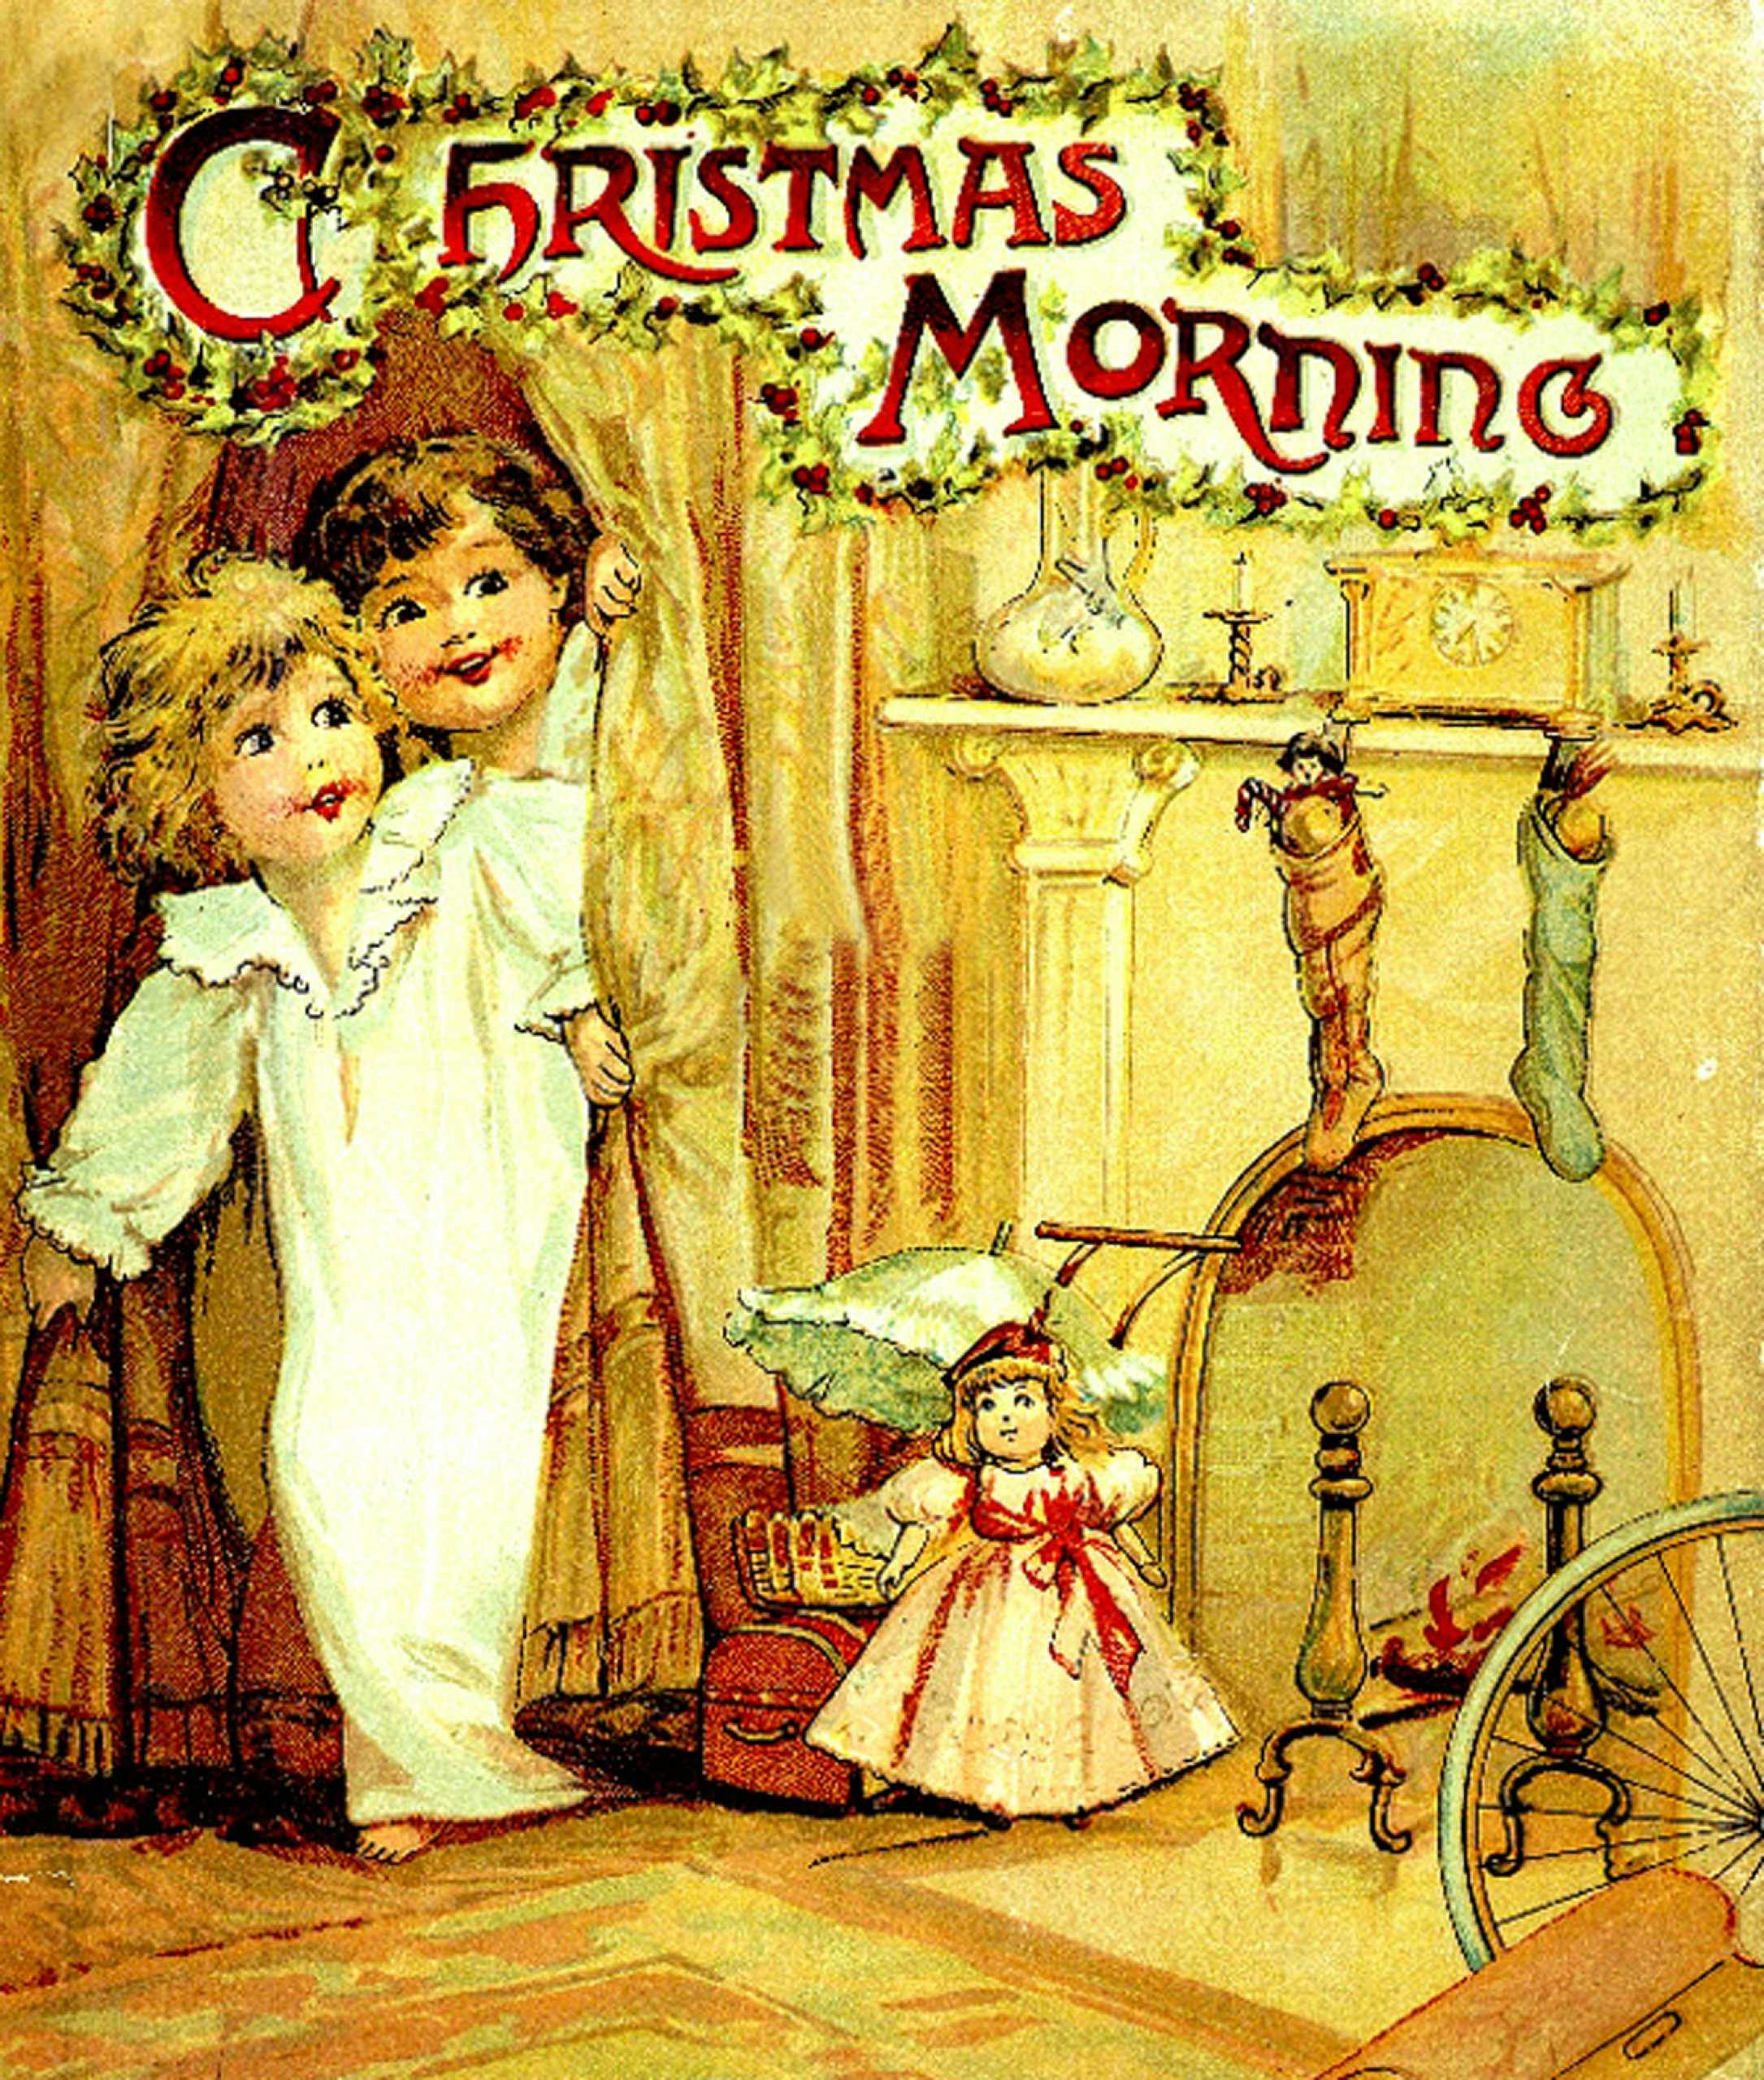 A Christmas Morning - Christmas Fairy Tales and Poems - Bingham Clifton